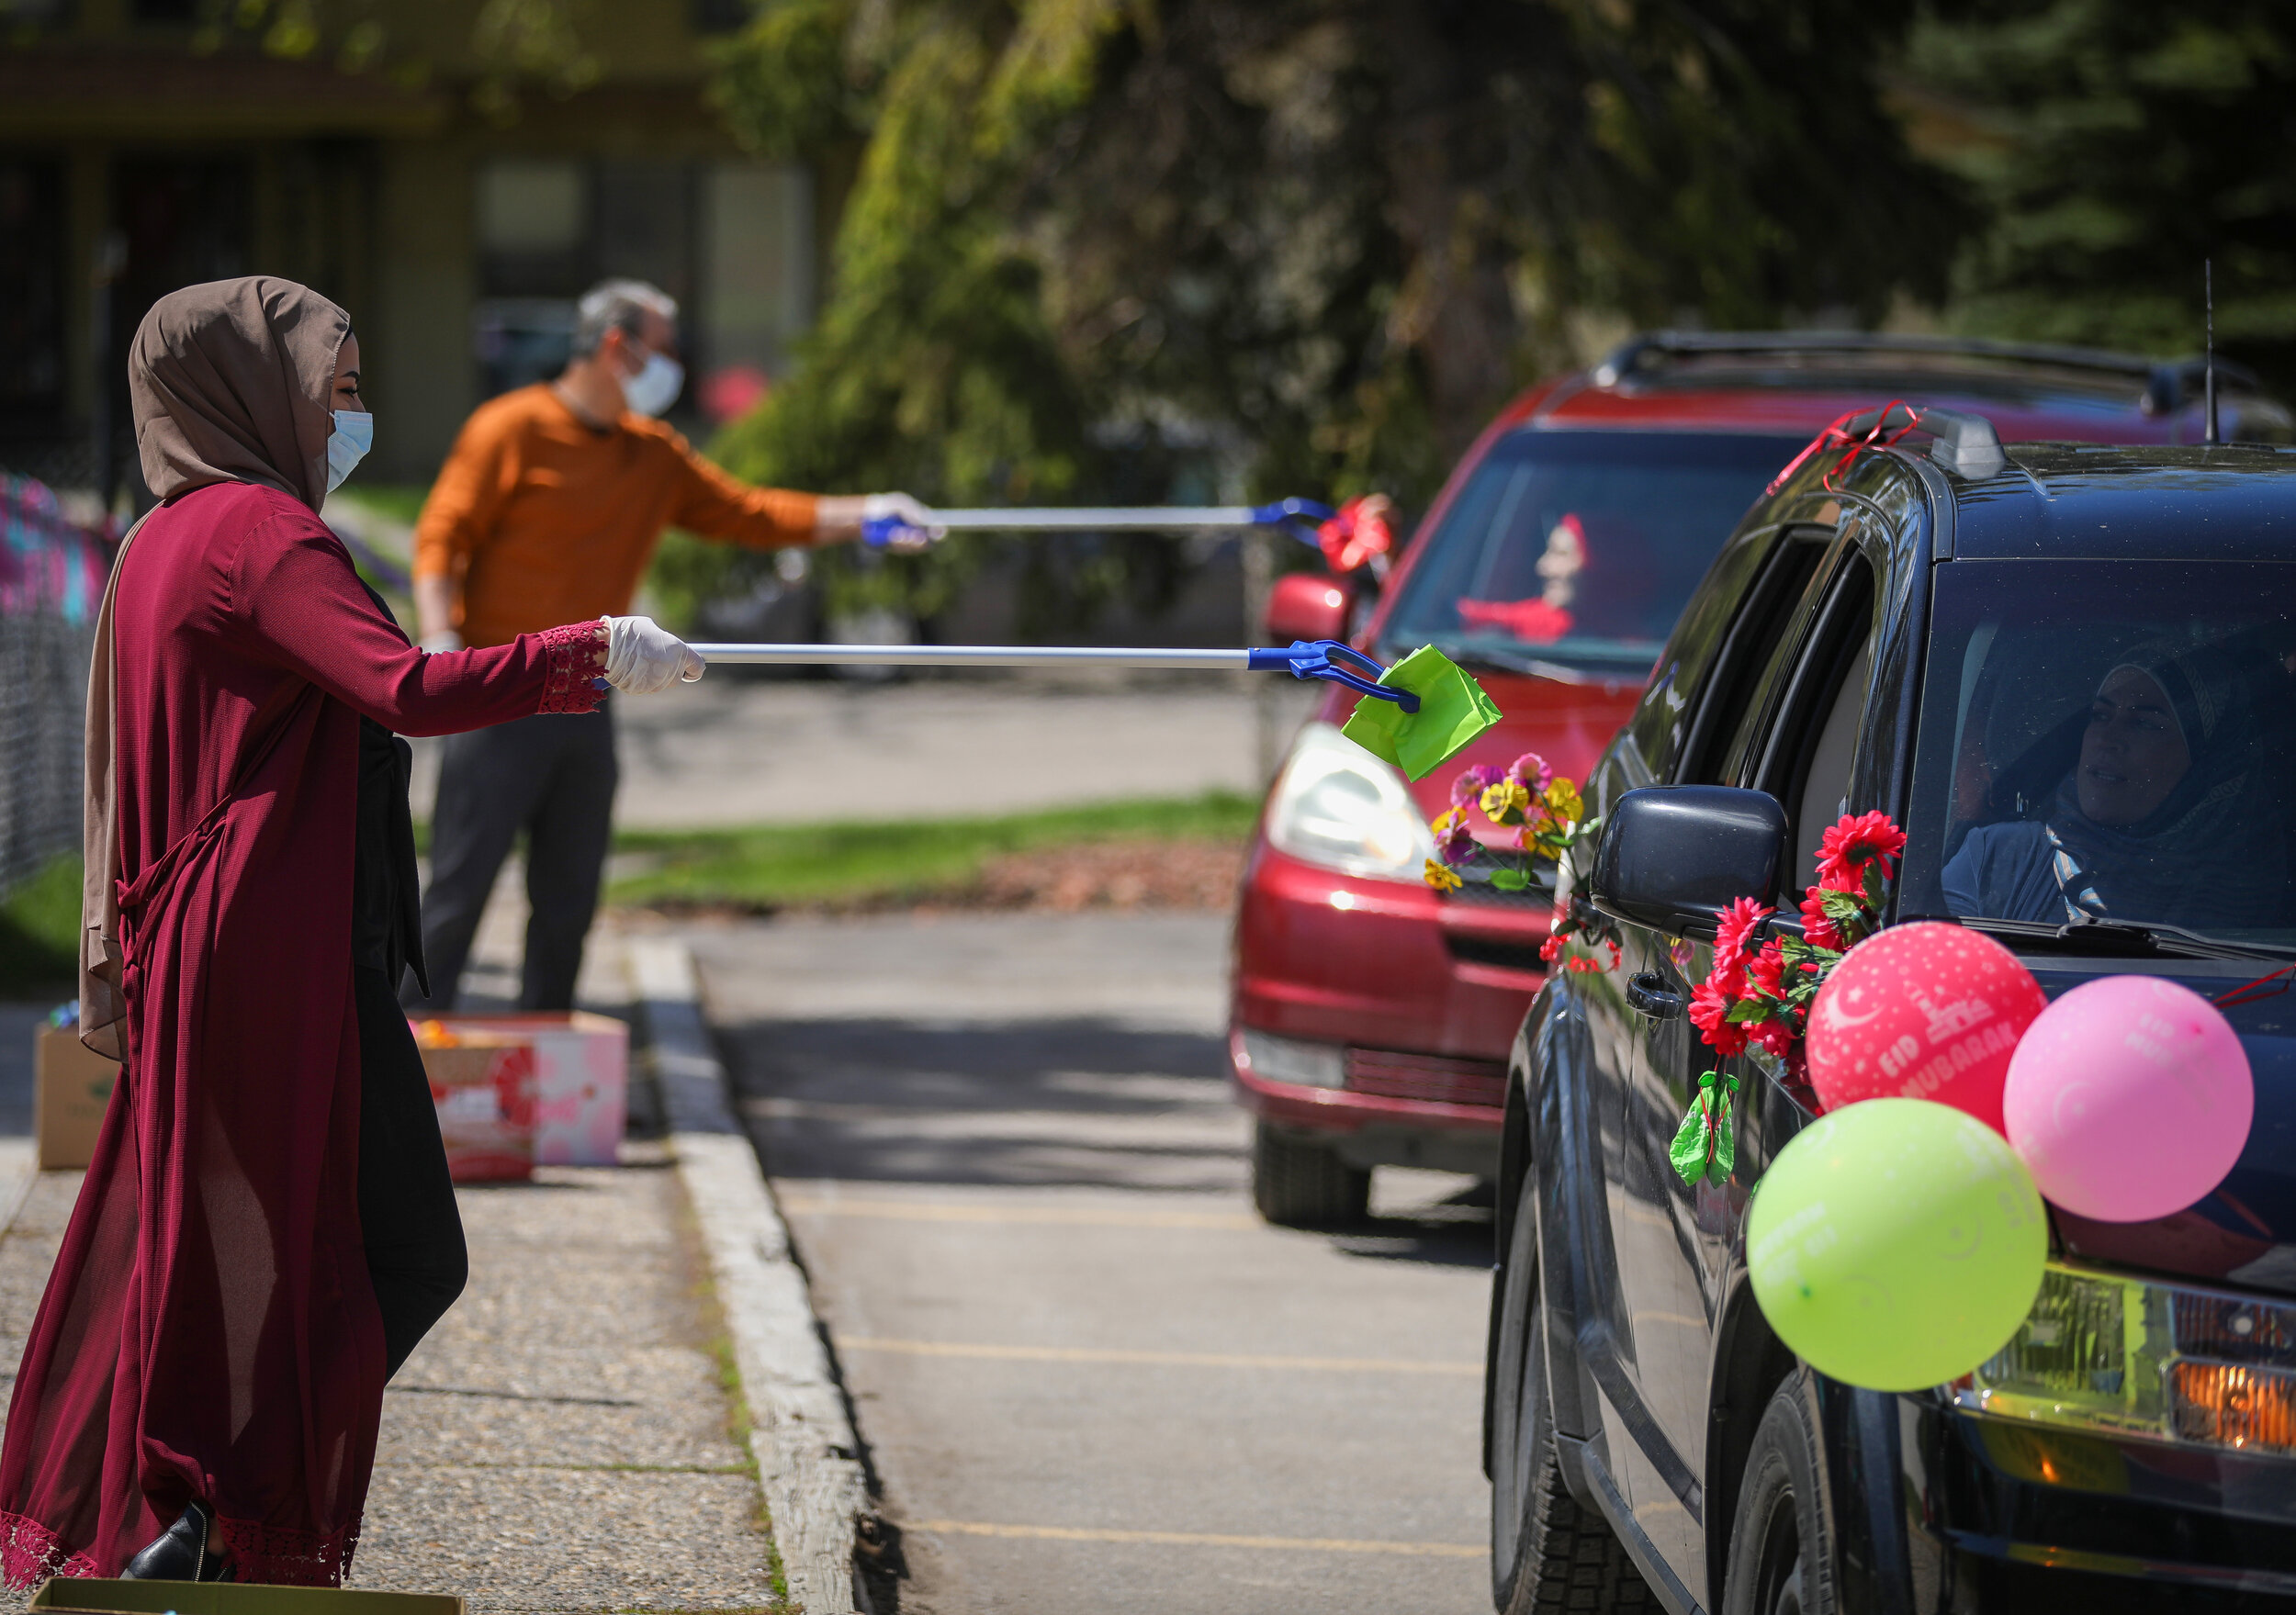  Rana Omar, left, hands out bags filled with treats to children during the drive by Eid at Al-Salam Centre in Calgary on May 24, 2020. 